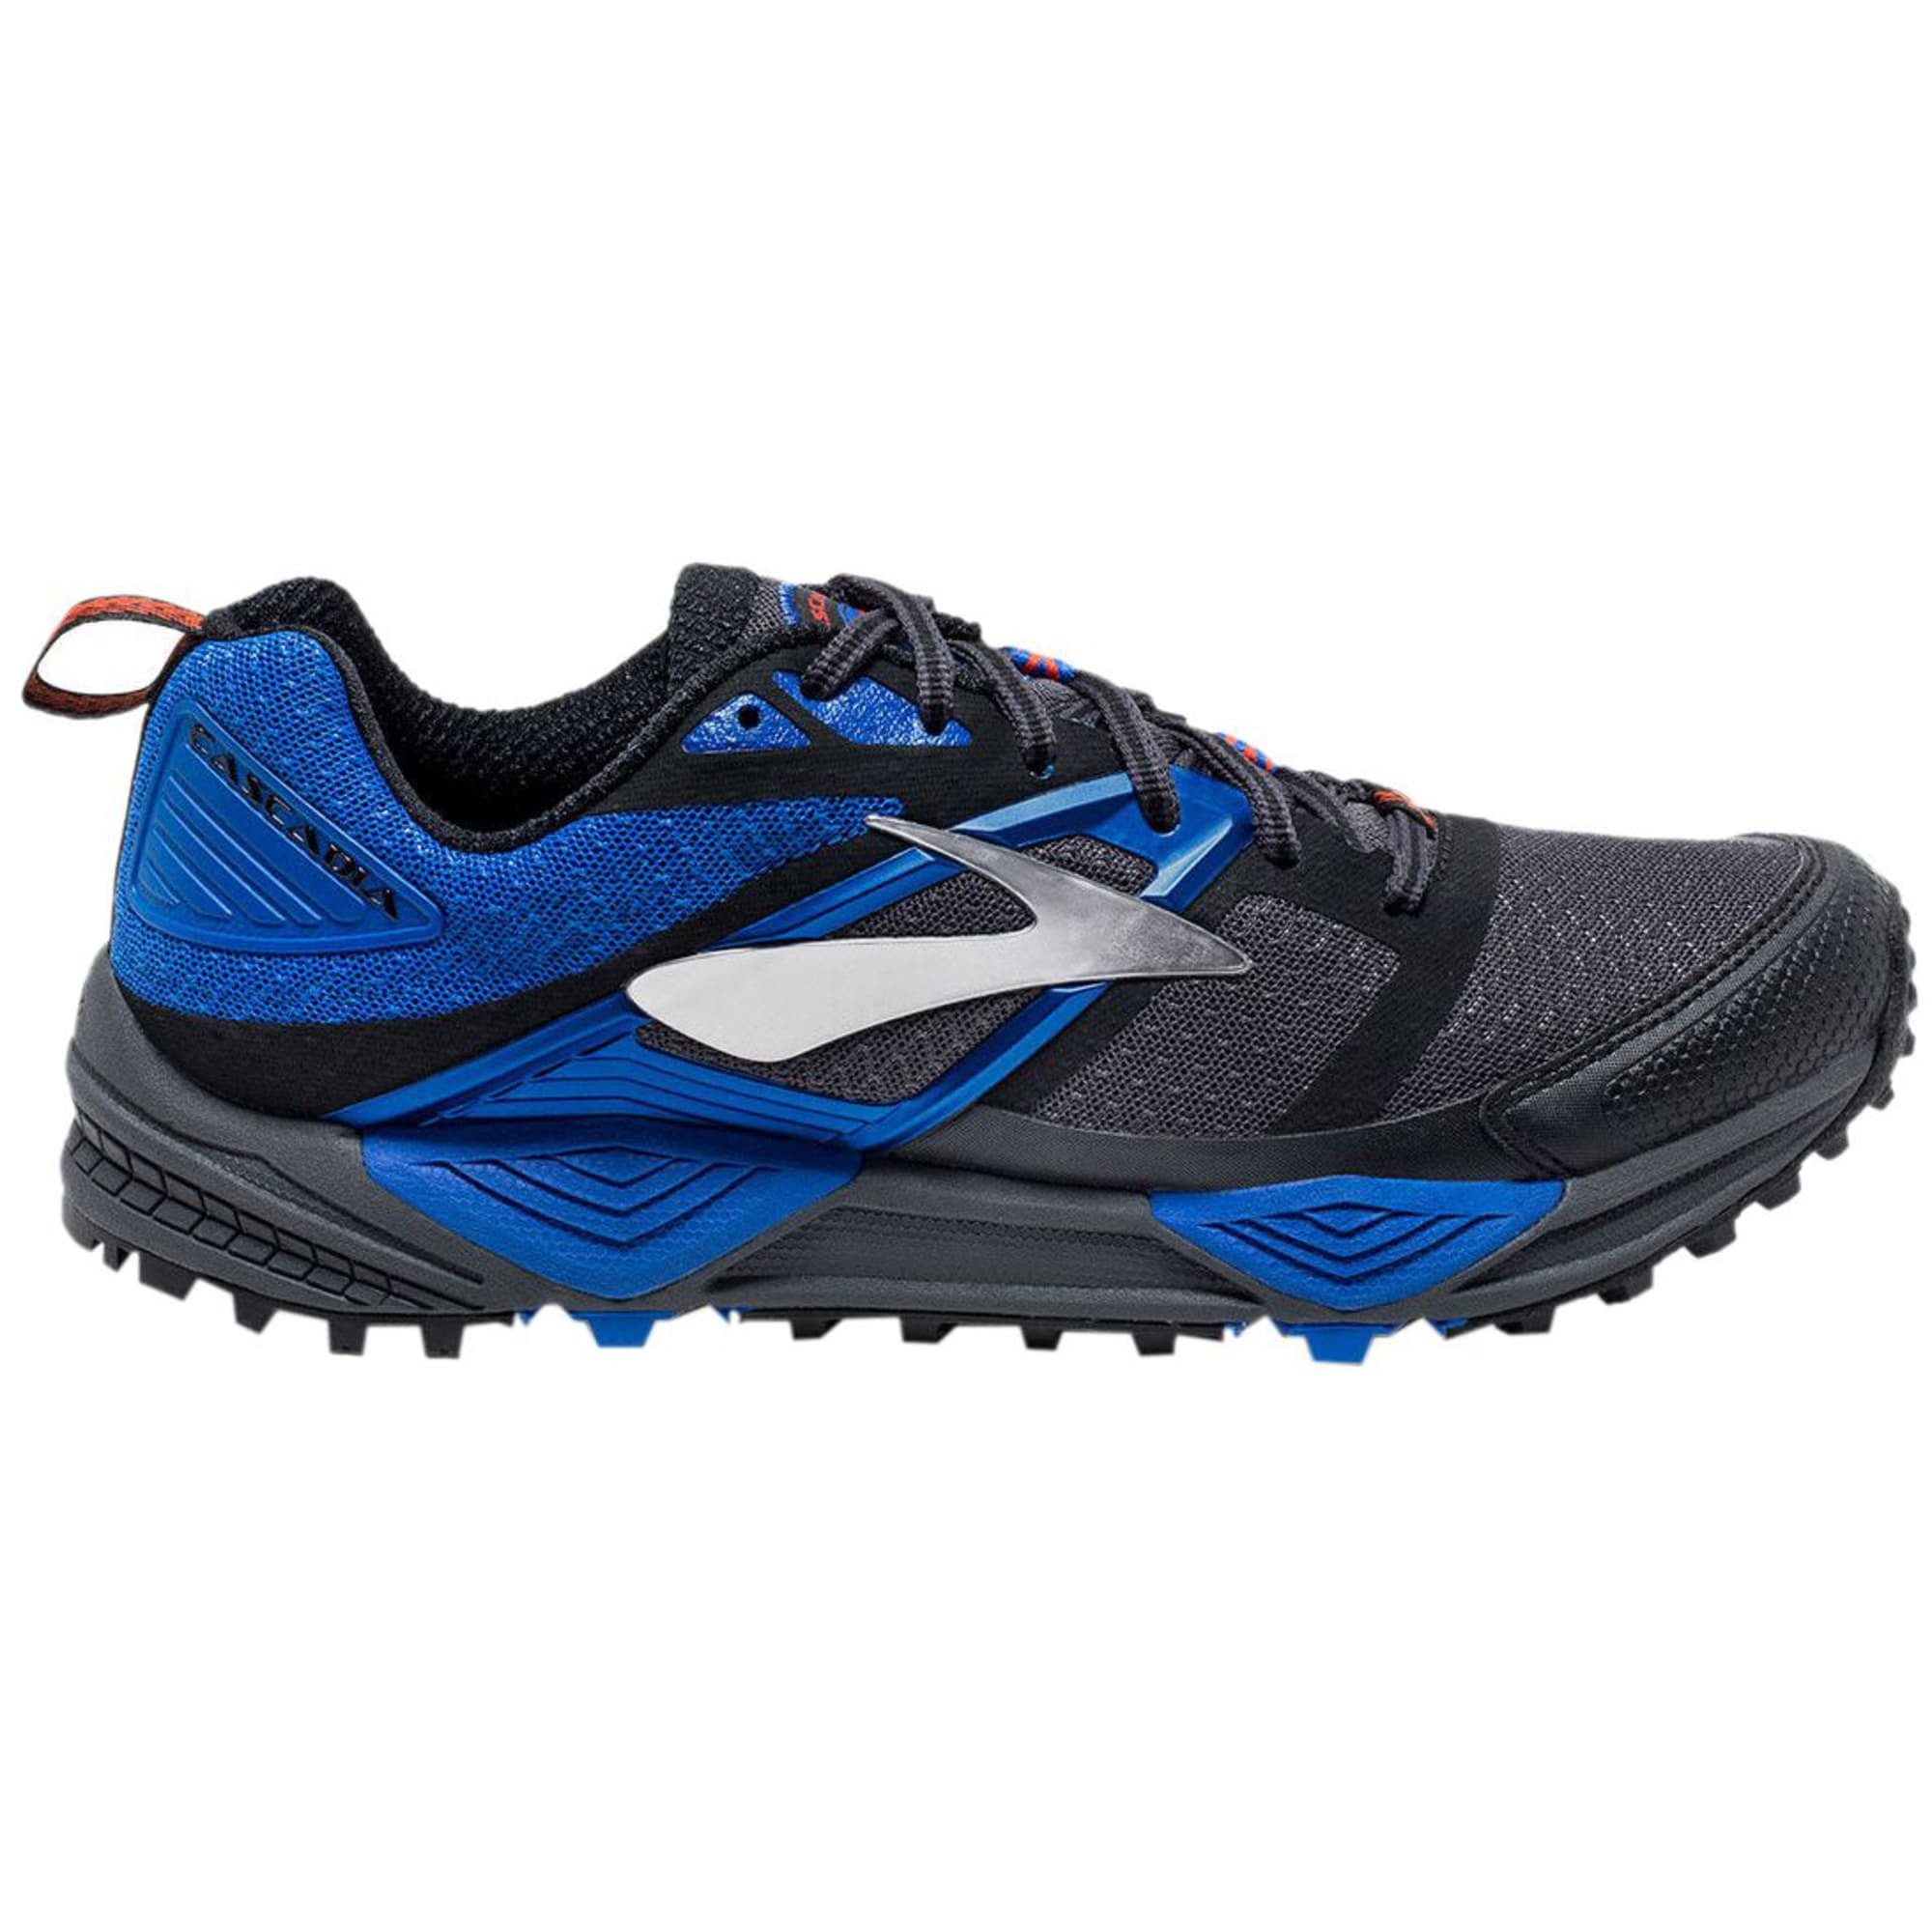 Men's 12 Running Shoes, Anthracite/Electric Blue/Black - Eastern Mountain Sports